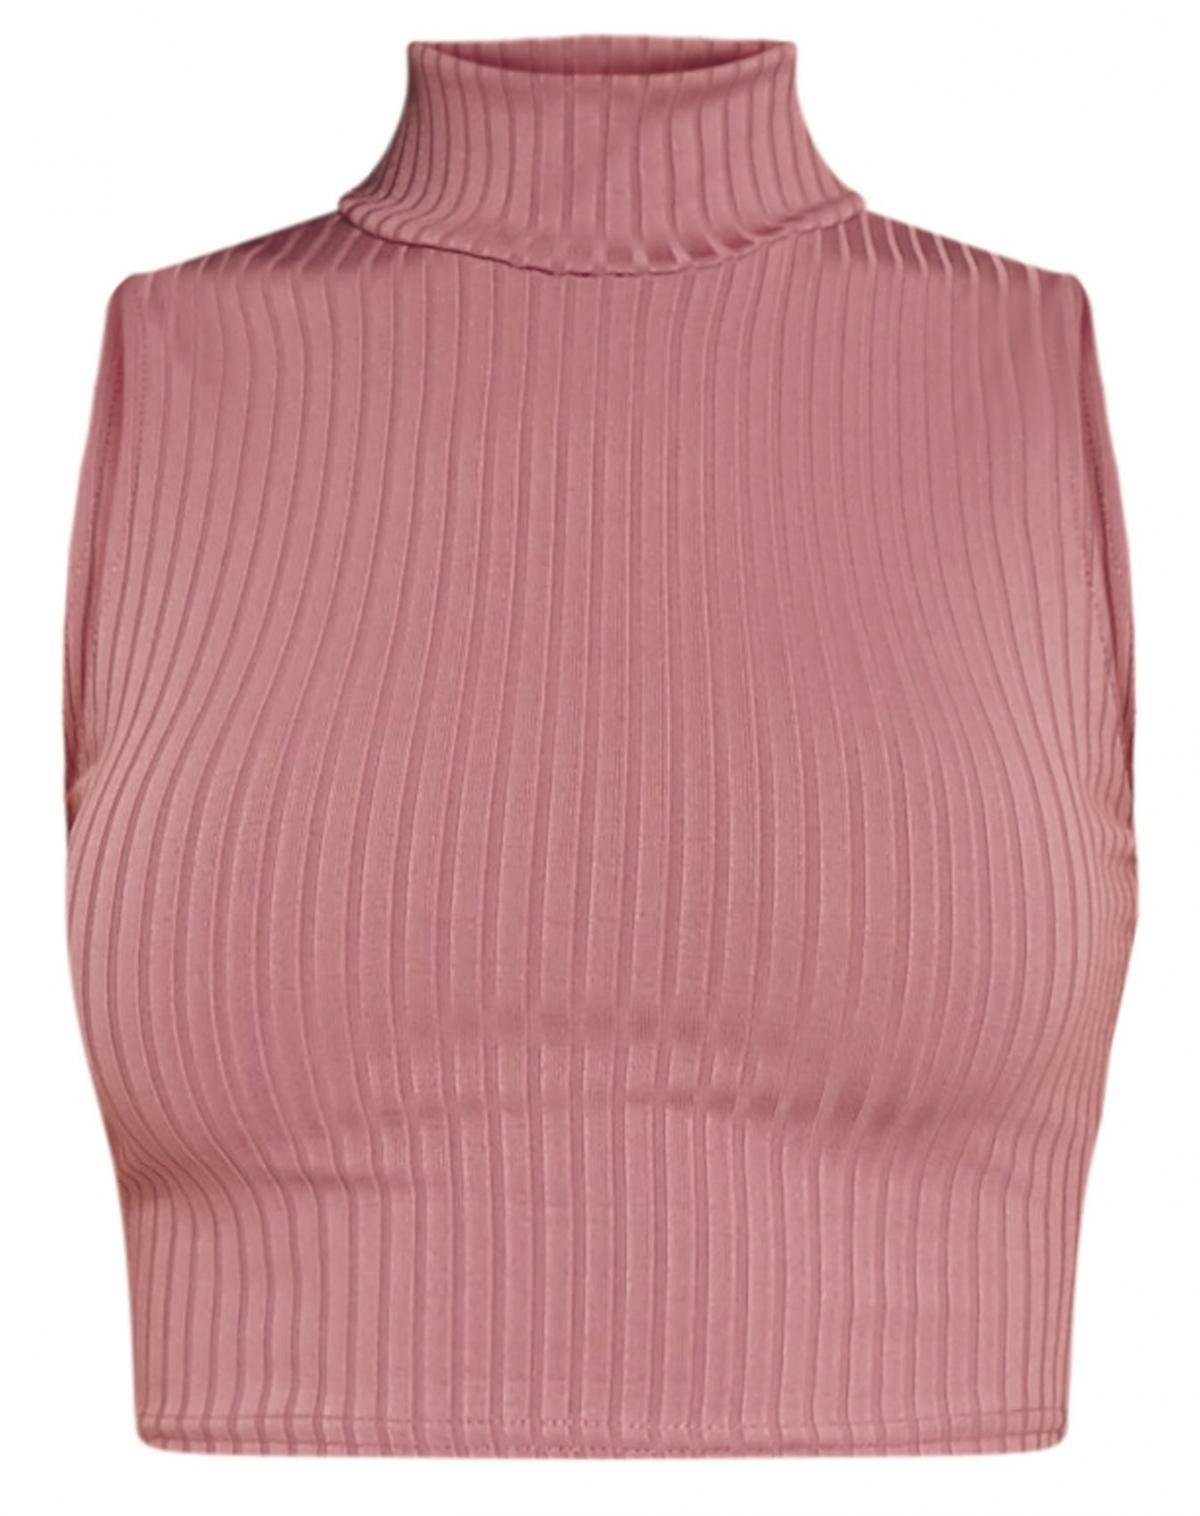 Pretty Little Thing, Ariana Mauve Ribbed Sleeveless Crop Top, £10.00